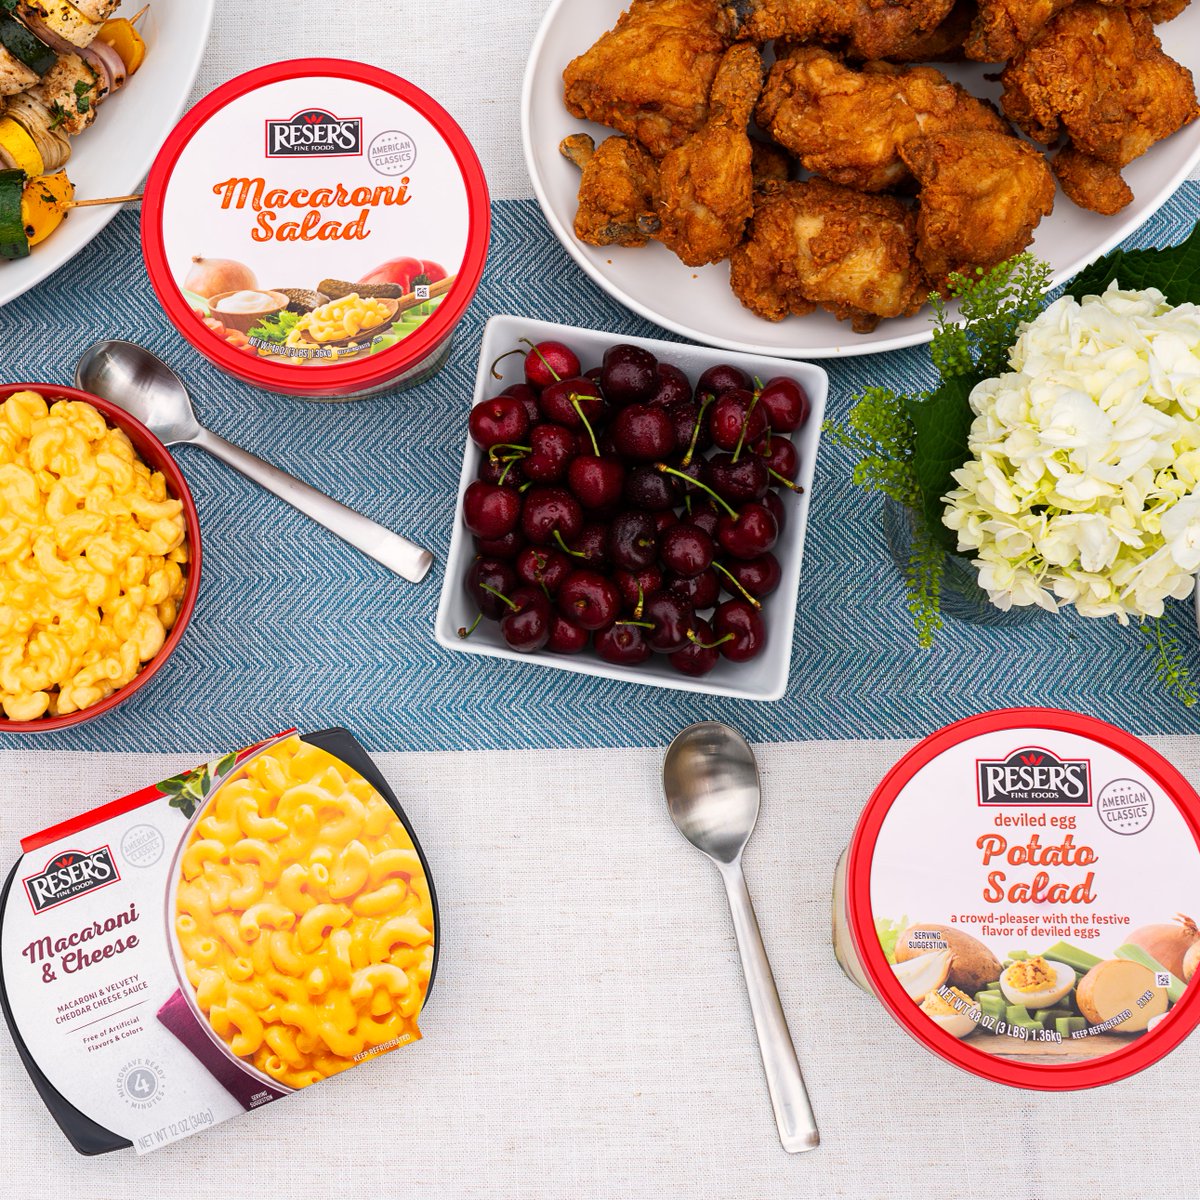 Deli salads and side dishes: culinary partners in dine! 😉 Who needs a main course when you have a power couple of deli salads and side dishes stealing the show? 😋 #Resers #sidedish #delisalad